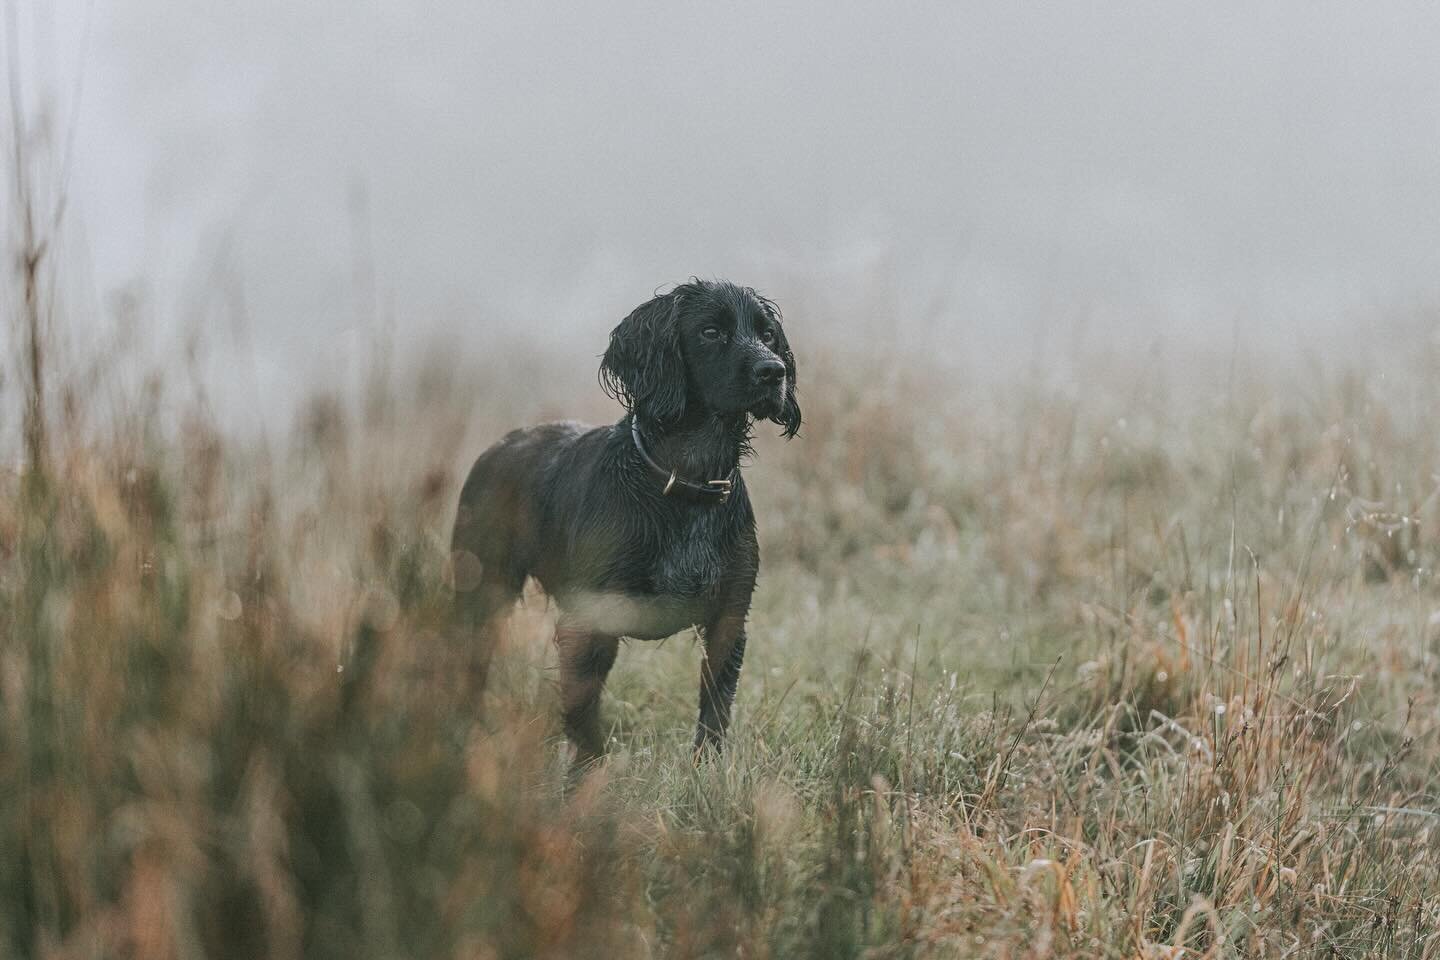 Our bestest girl is finally starting to understand her role is to be the model on all of her walks 🐶

#evielewisphotography #equinephotography #horsephotographer #equinephotographer #horsephotography #equestrianlifestyle #Horselifestyle #equinelifes